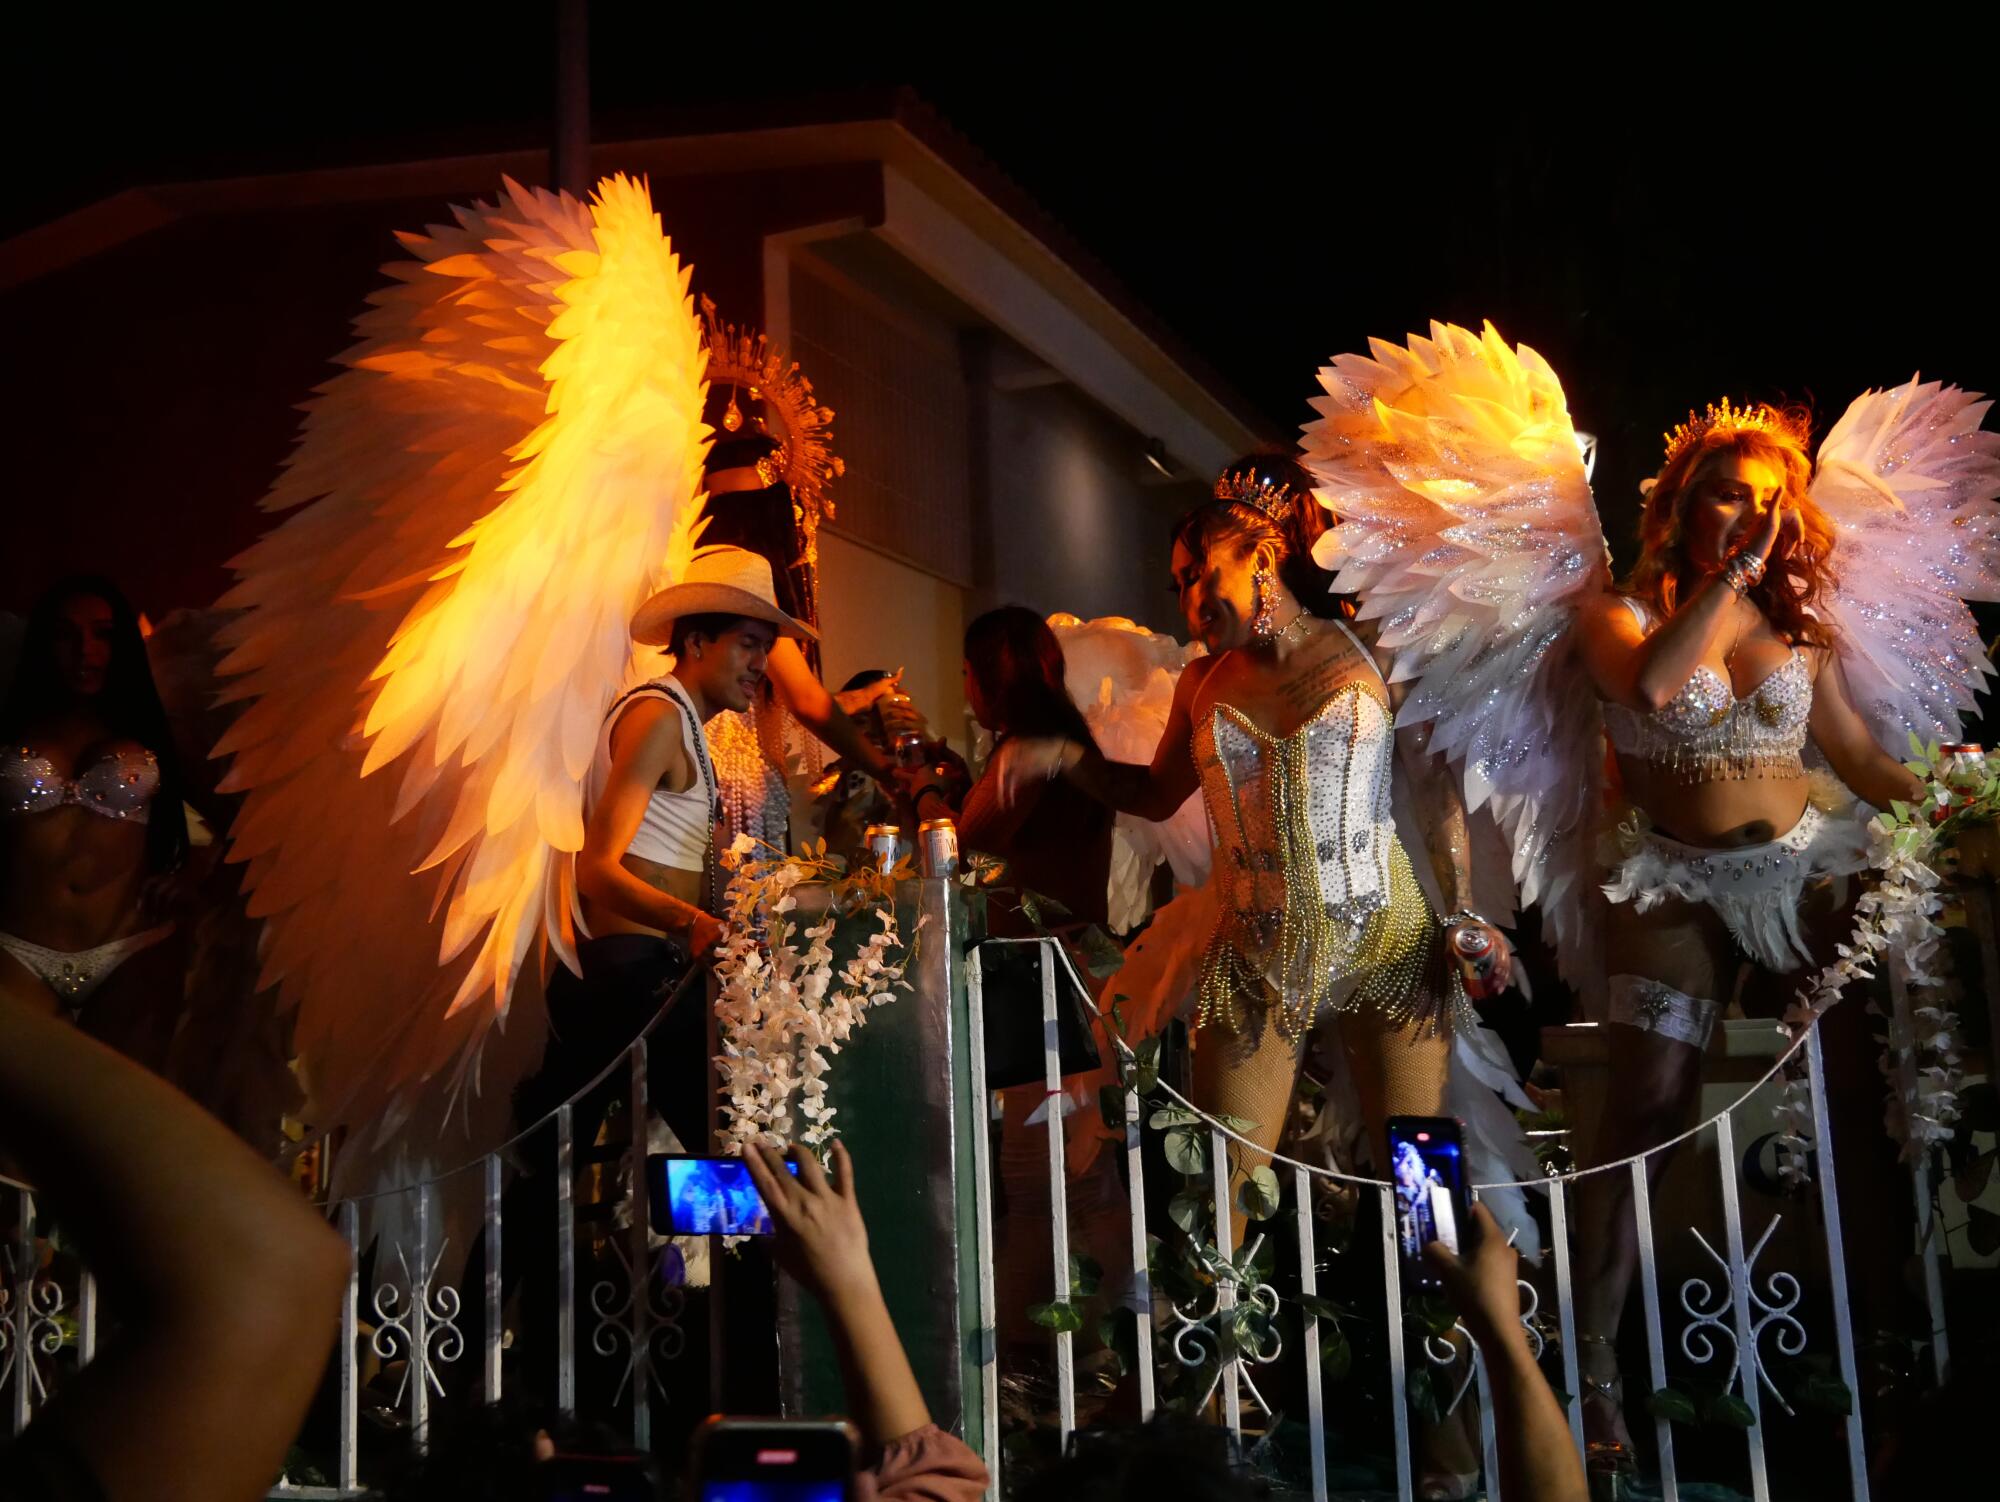 Performers bring the first night of celebrations to a close in Juchitan de Zaragoza.